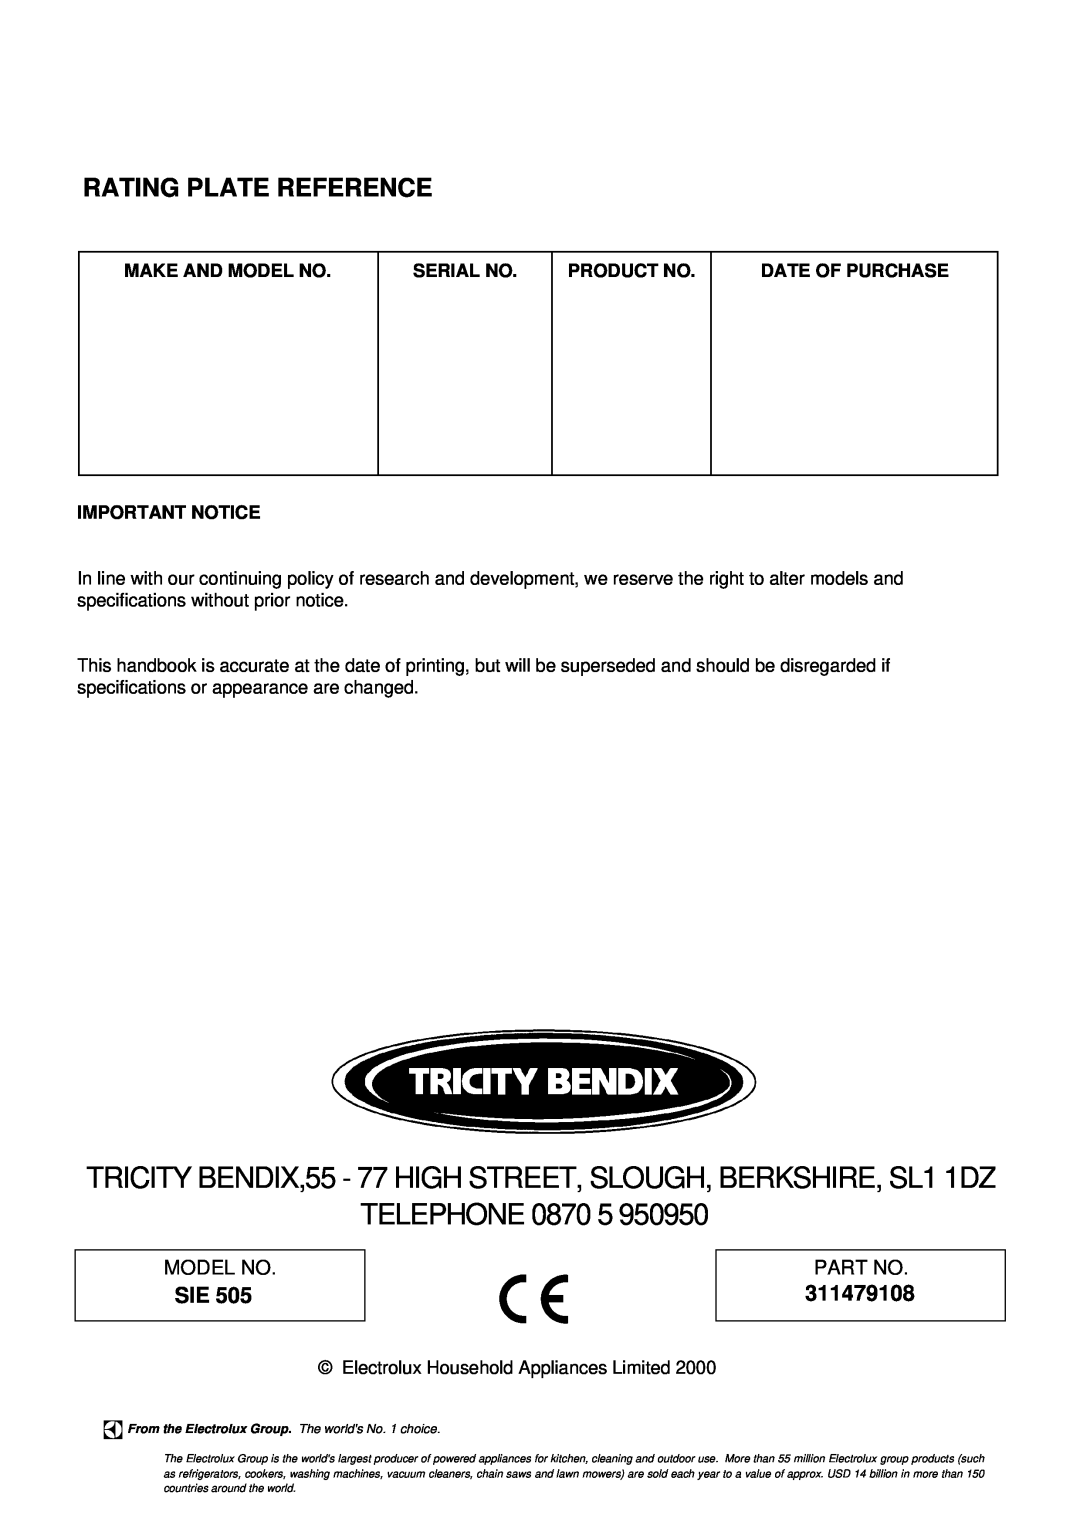 Tricity Bendix SIE 505 Rating Plate Reference, 311479108, TRICITY BENDIX,55 - 77 HIGH STREET, SLOUGH, BERKSHIRE, SL1 1DZ 